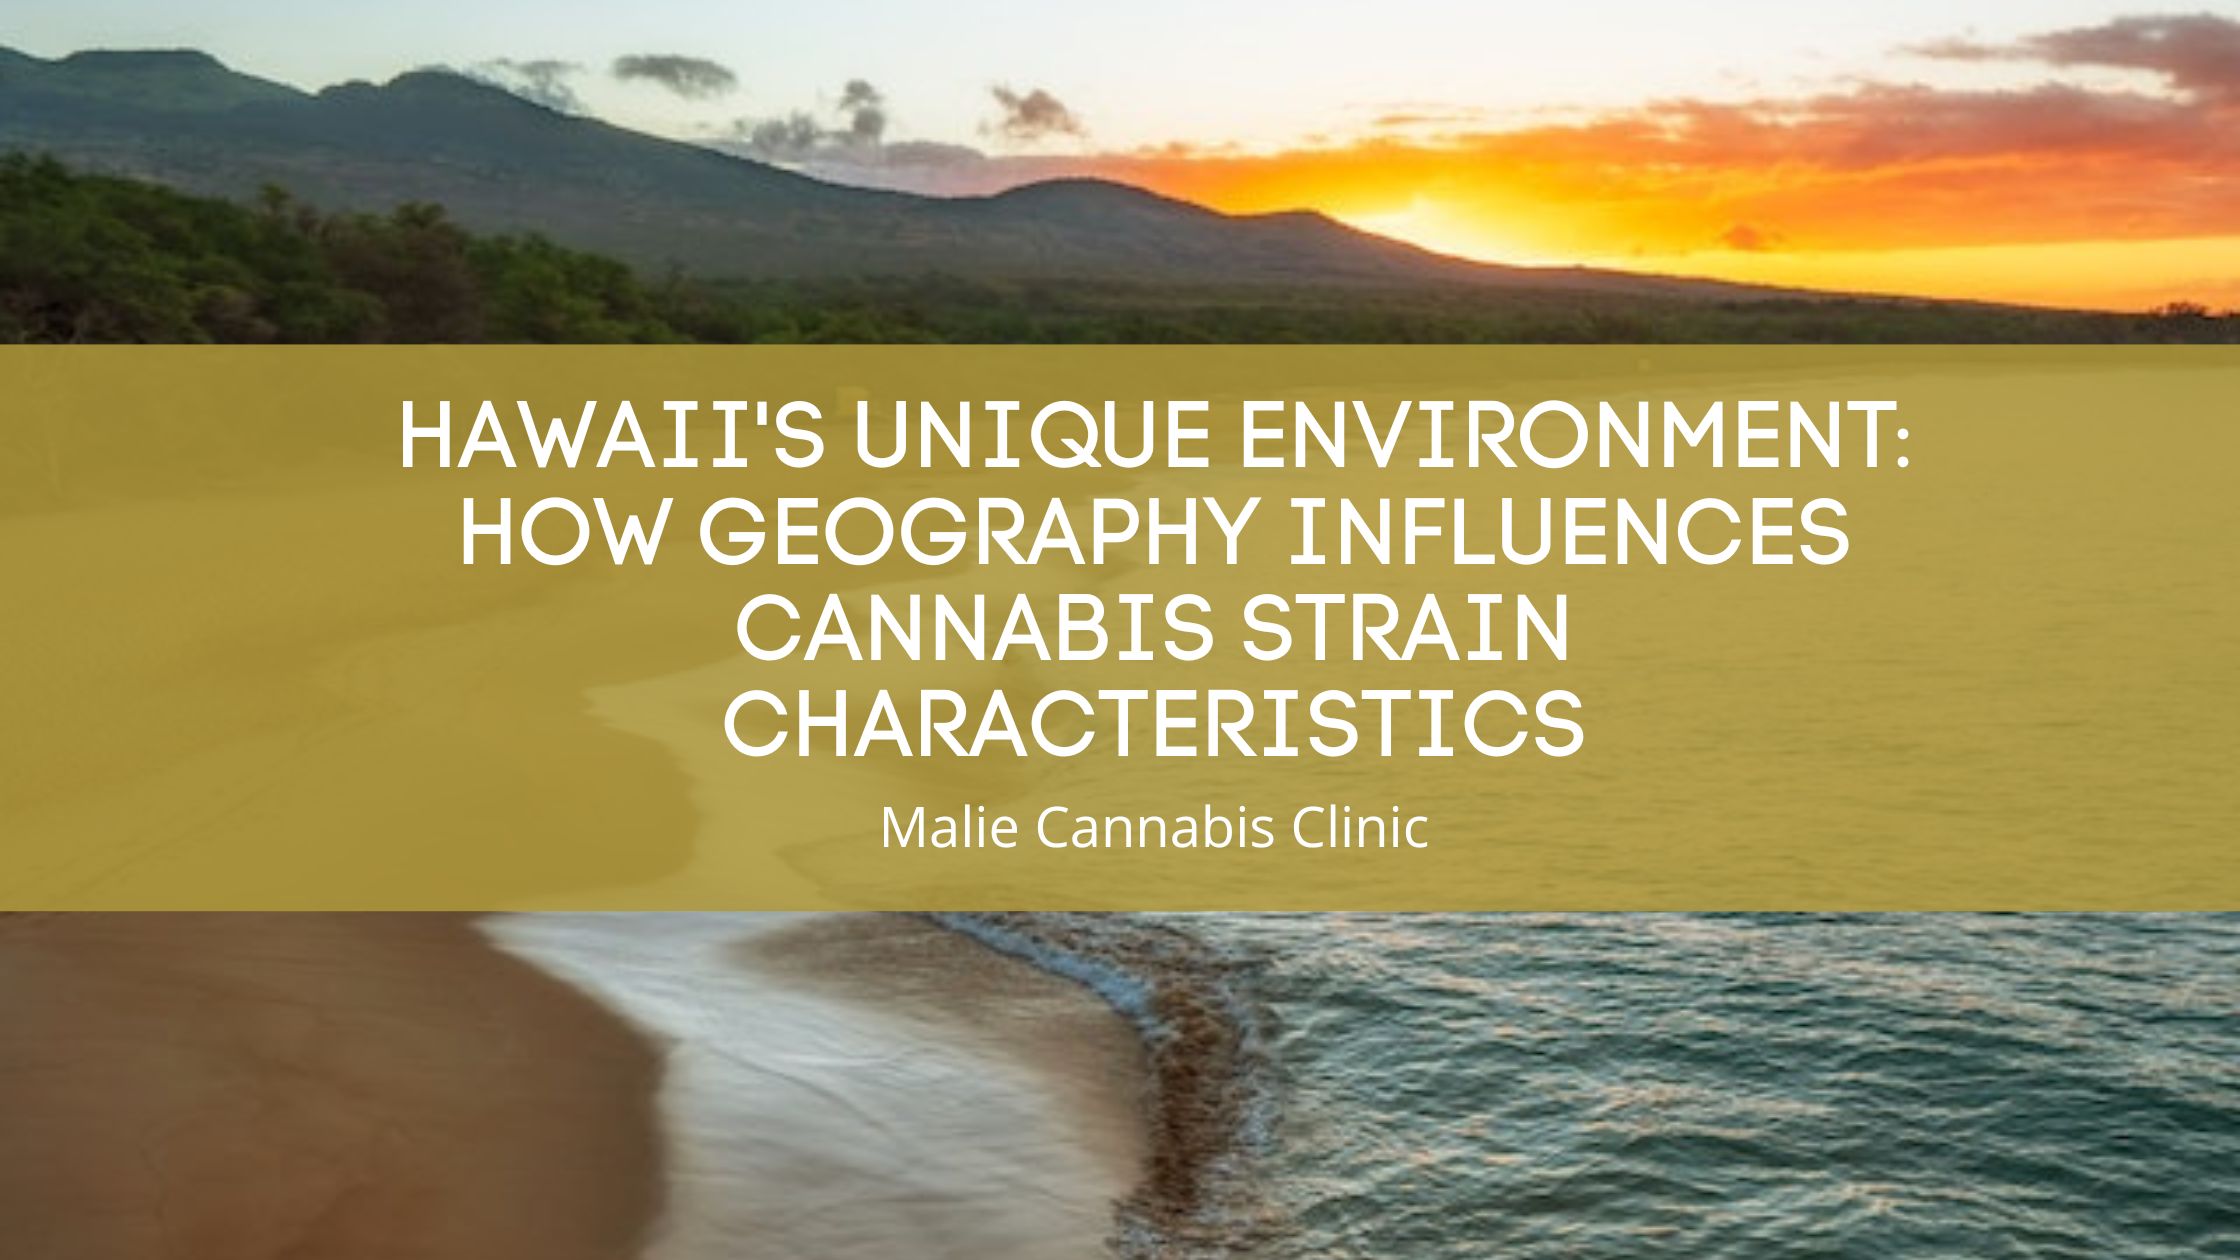 Hawaii's Unique Environment: How Geography Influences Cannabis Strain Characteristics